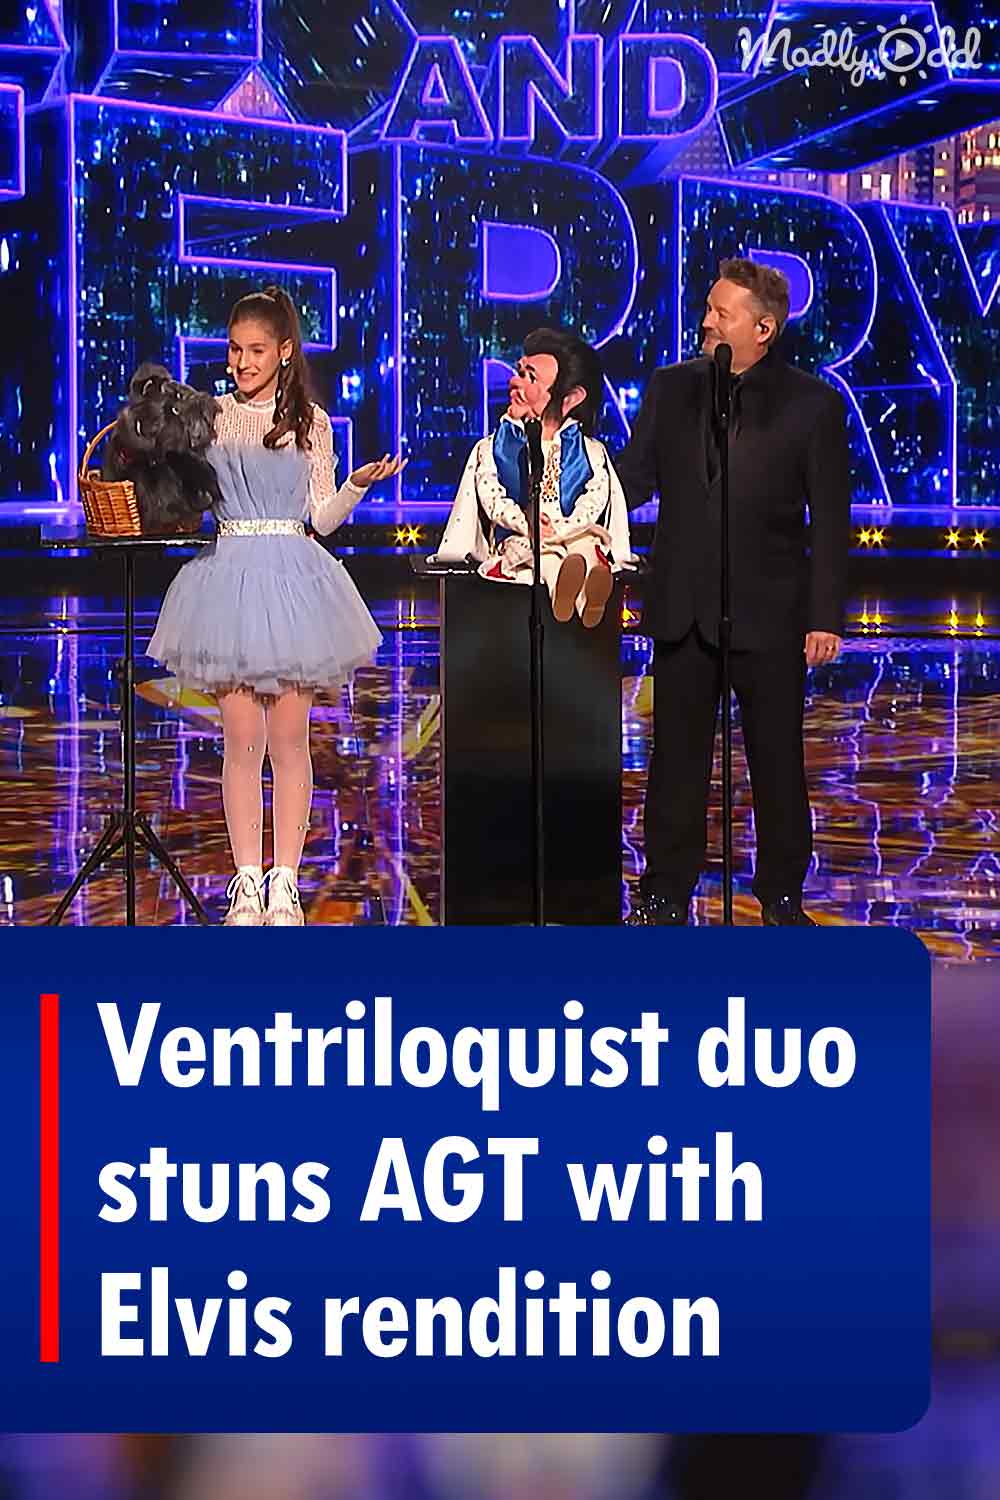 Ventriloquist duo stuns AGT with Elvis rendition